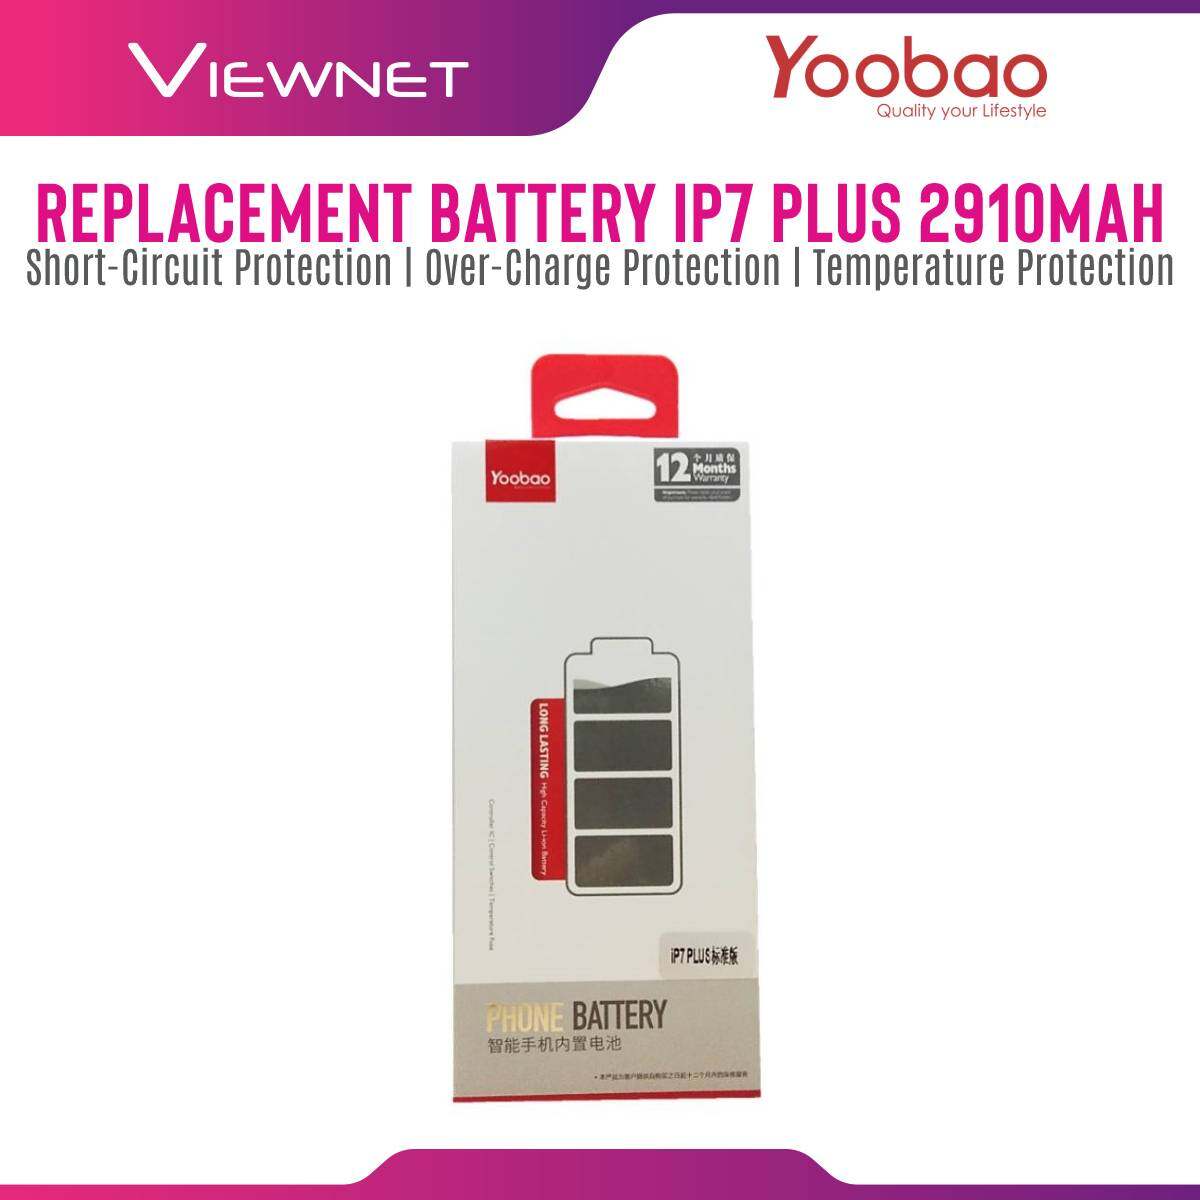 Yoobao 2910mAh Standard iPhone 7 Plus Phone Battery Long Battery Life with 12 Month Warranty